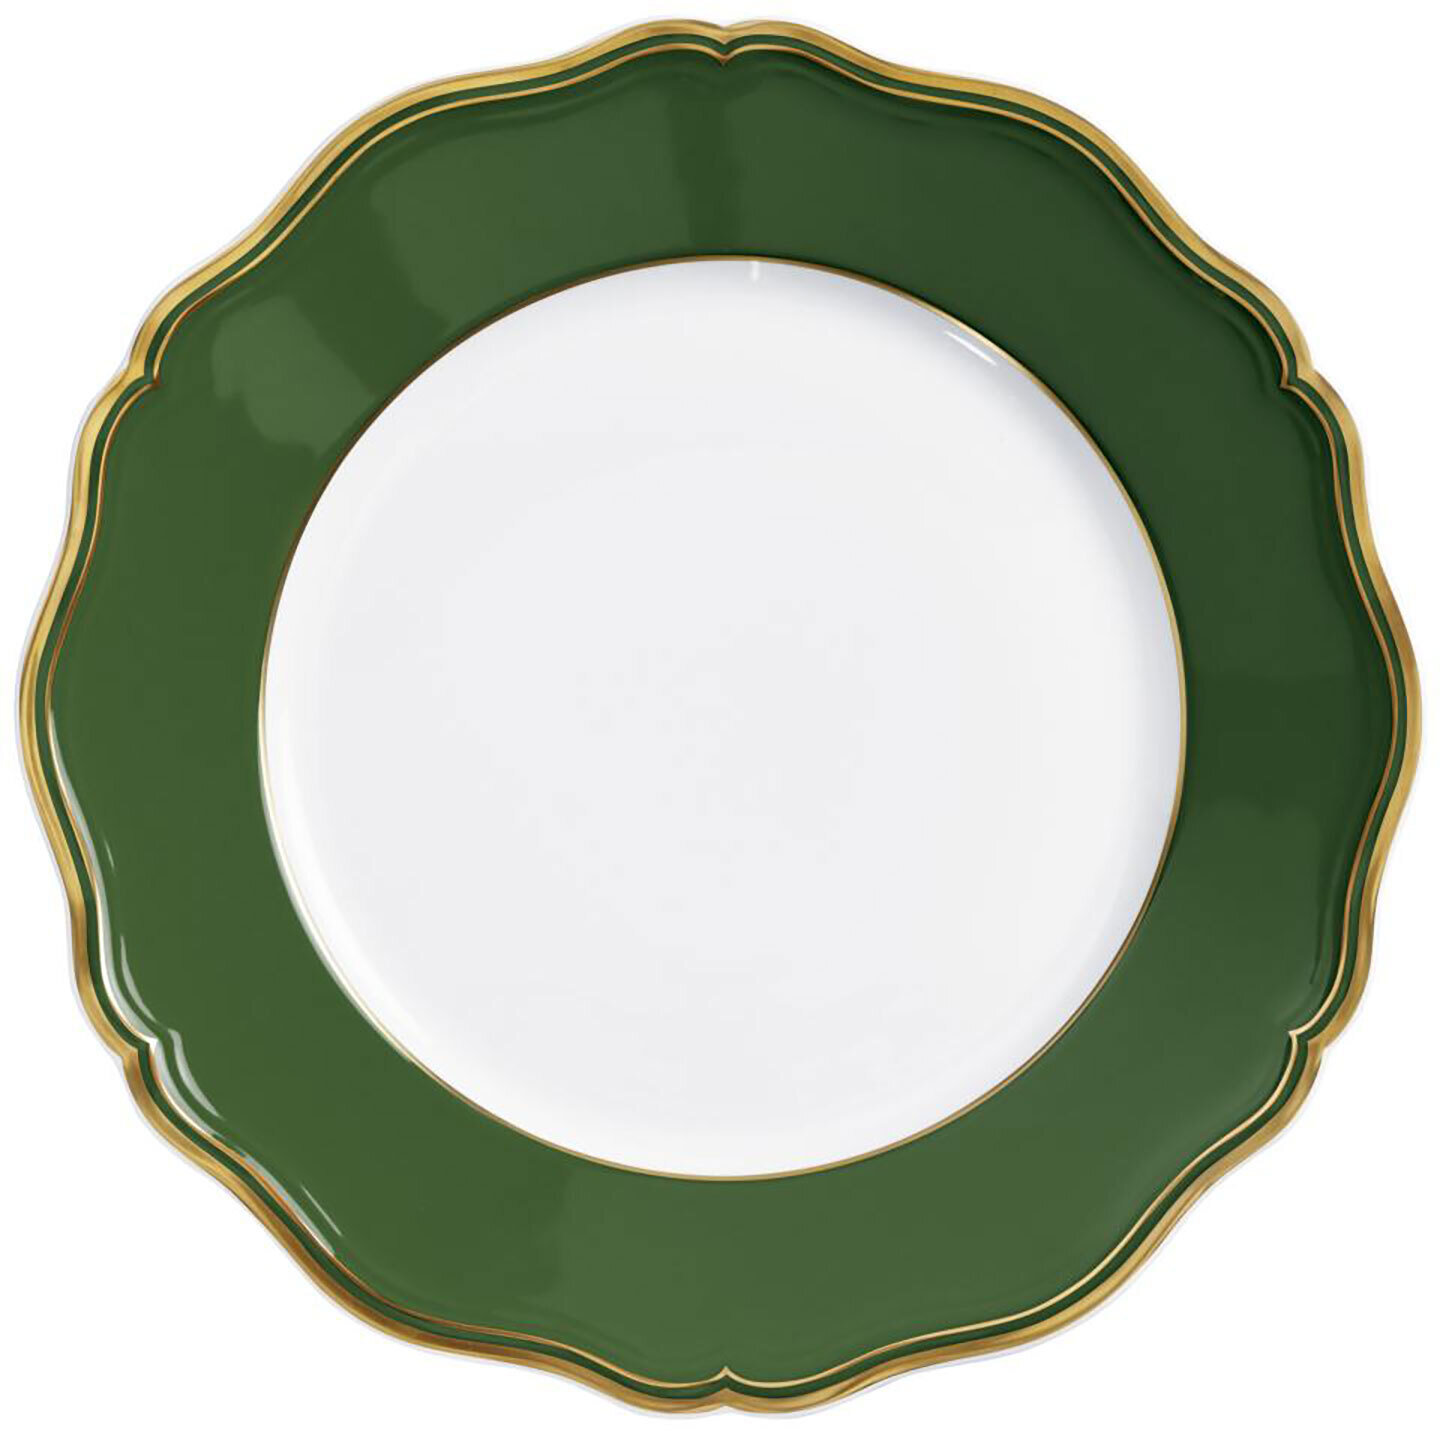 Raynaud Limoges Mazurka Or Green Dinner Plate 10.6 Inch 0872-01-101027